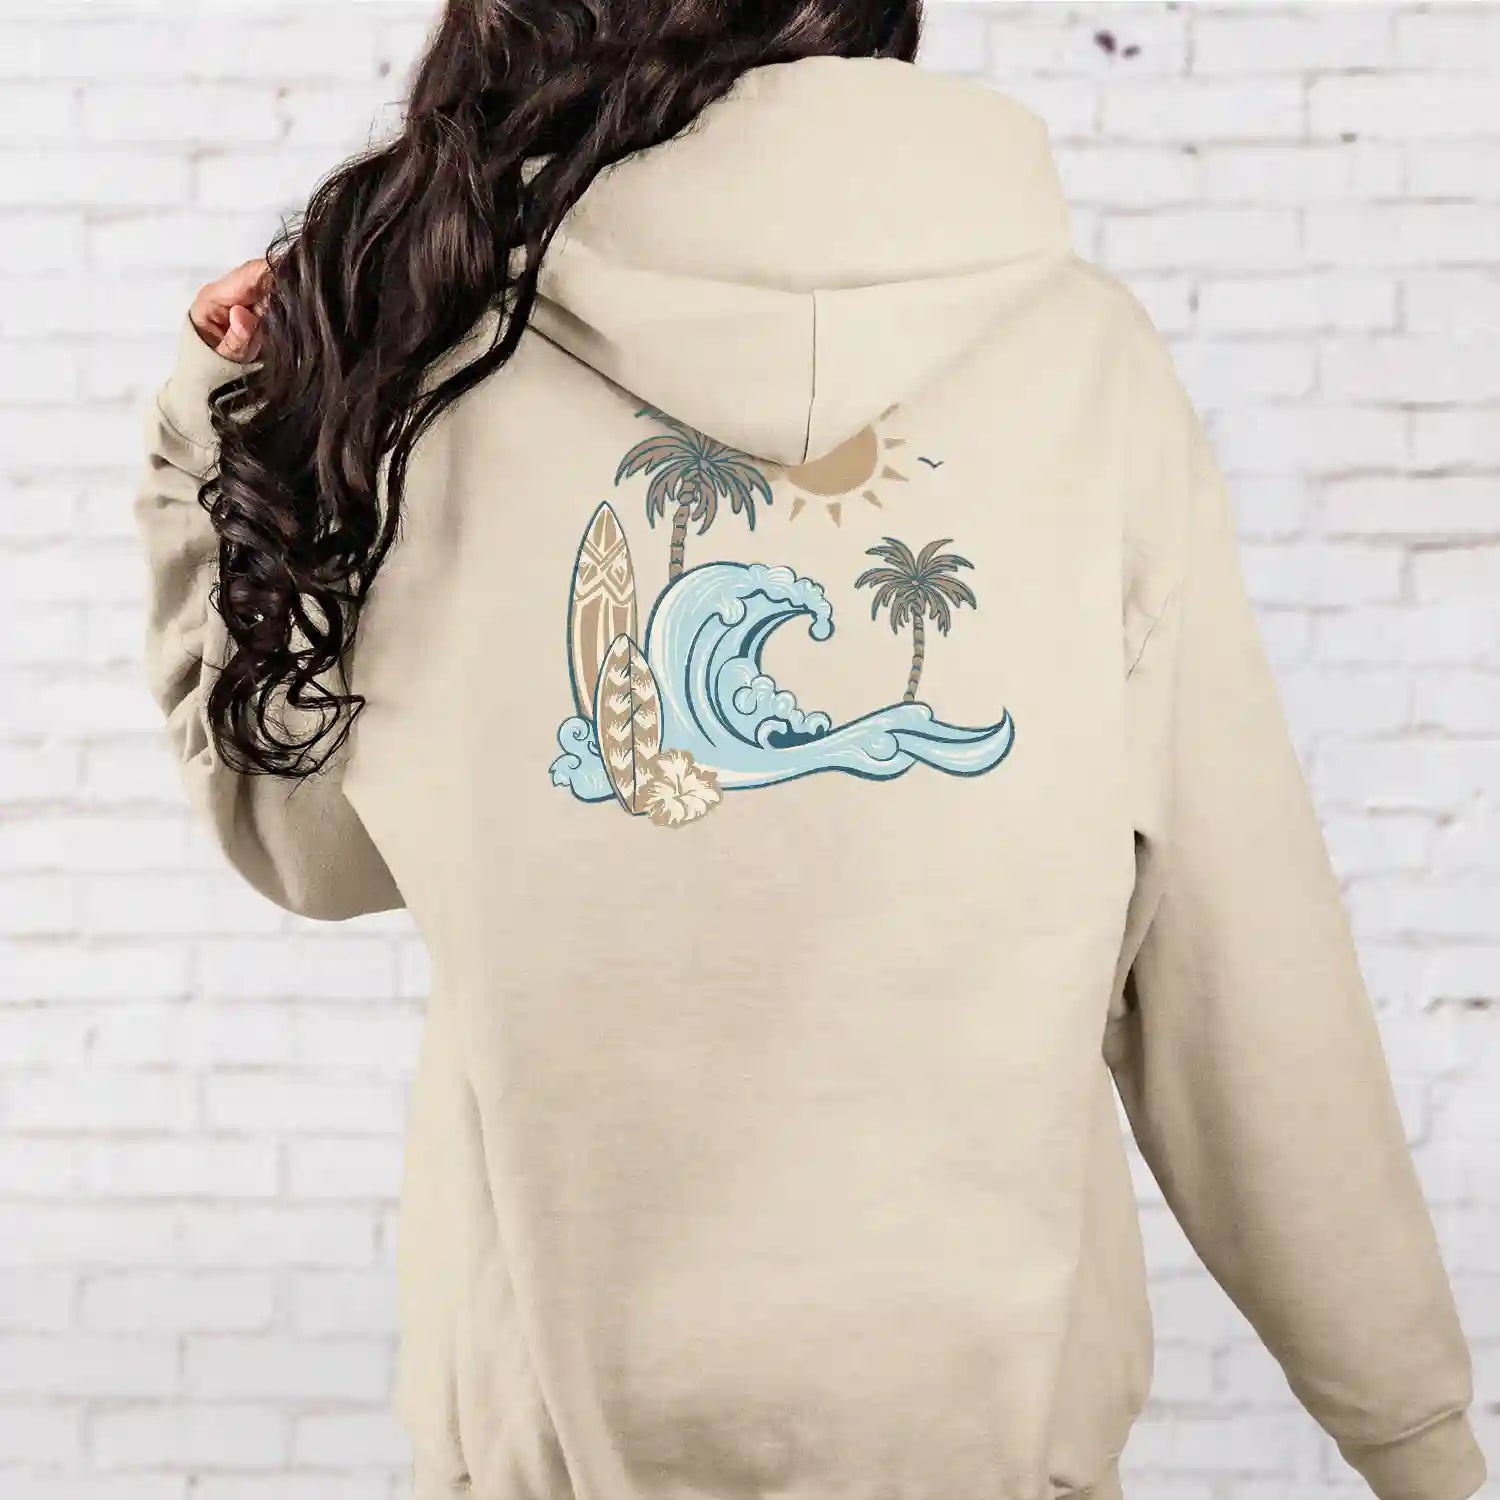 The back of a woman wearing a Nalu o ka Mana (Waves of Faith) Hoodie by Be Still and Know featuring the BSAK logo.